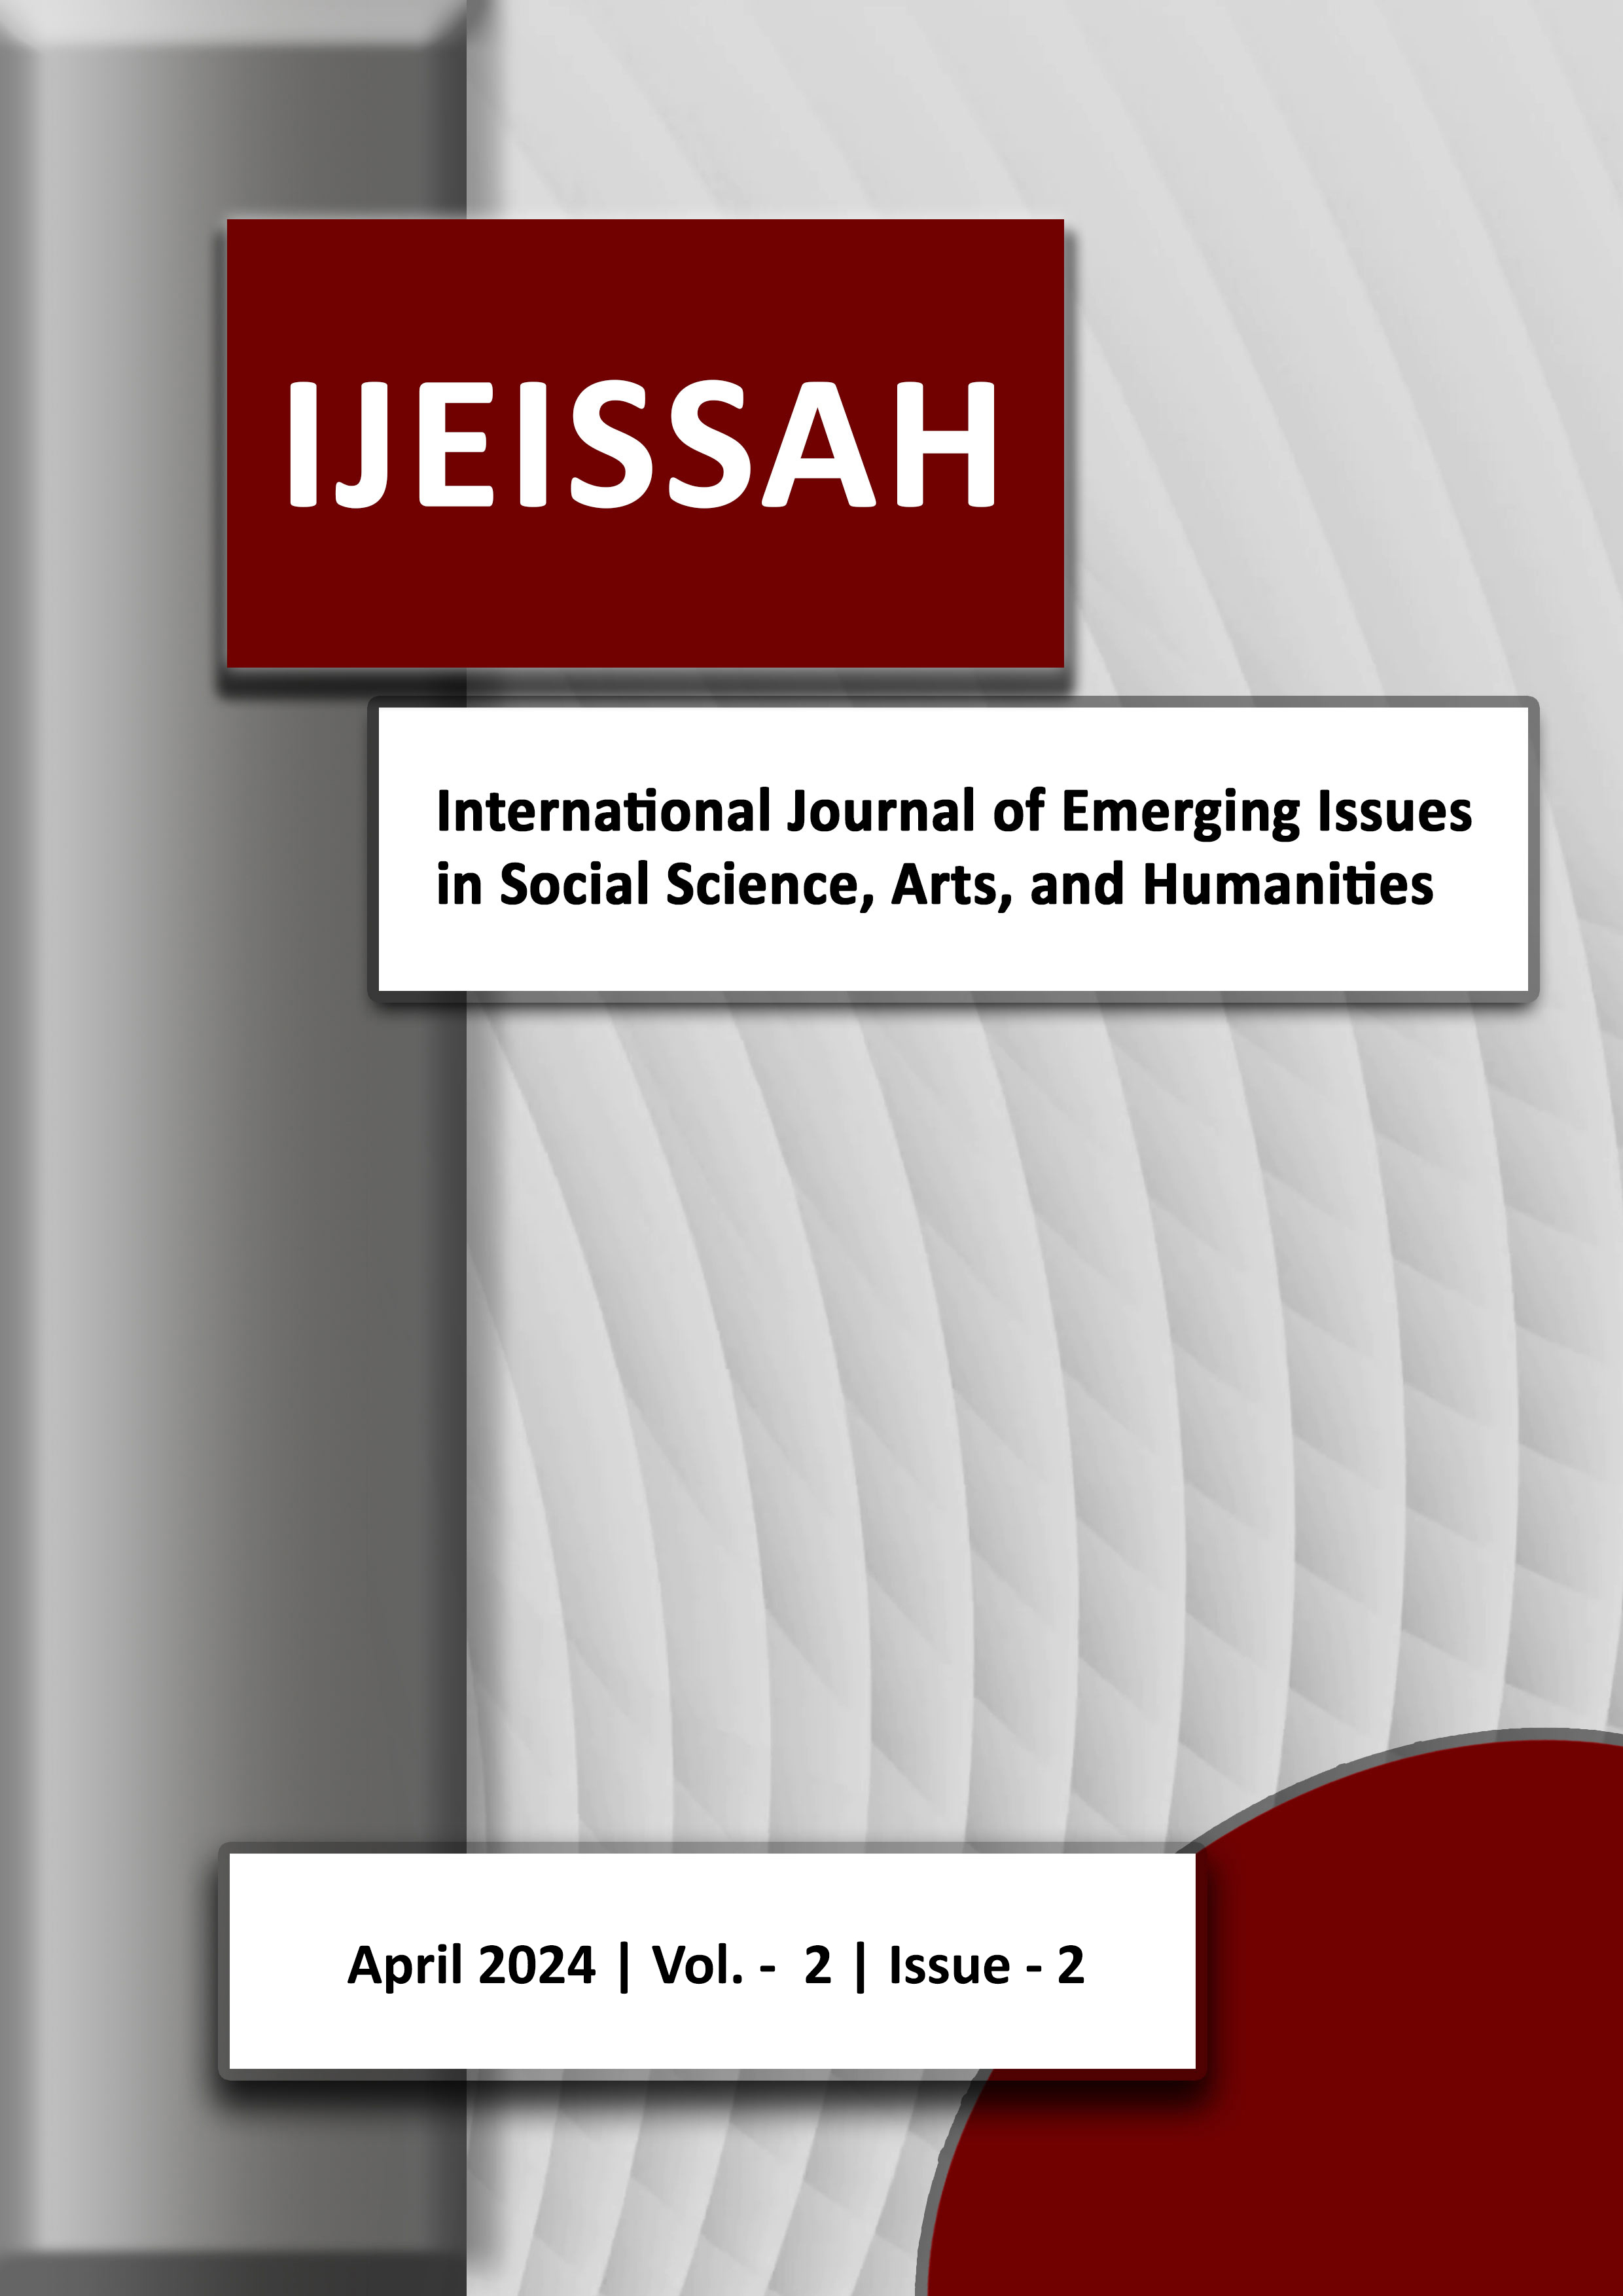 					View Vol. 2 No. 2 (2024): International Journal of Emerging Issues in Social Science, Arts, and Humanities (IJEISSAH)
				